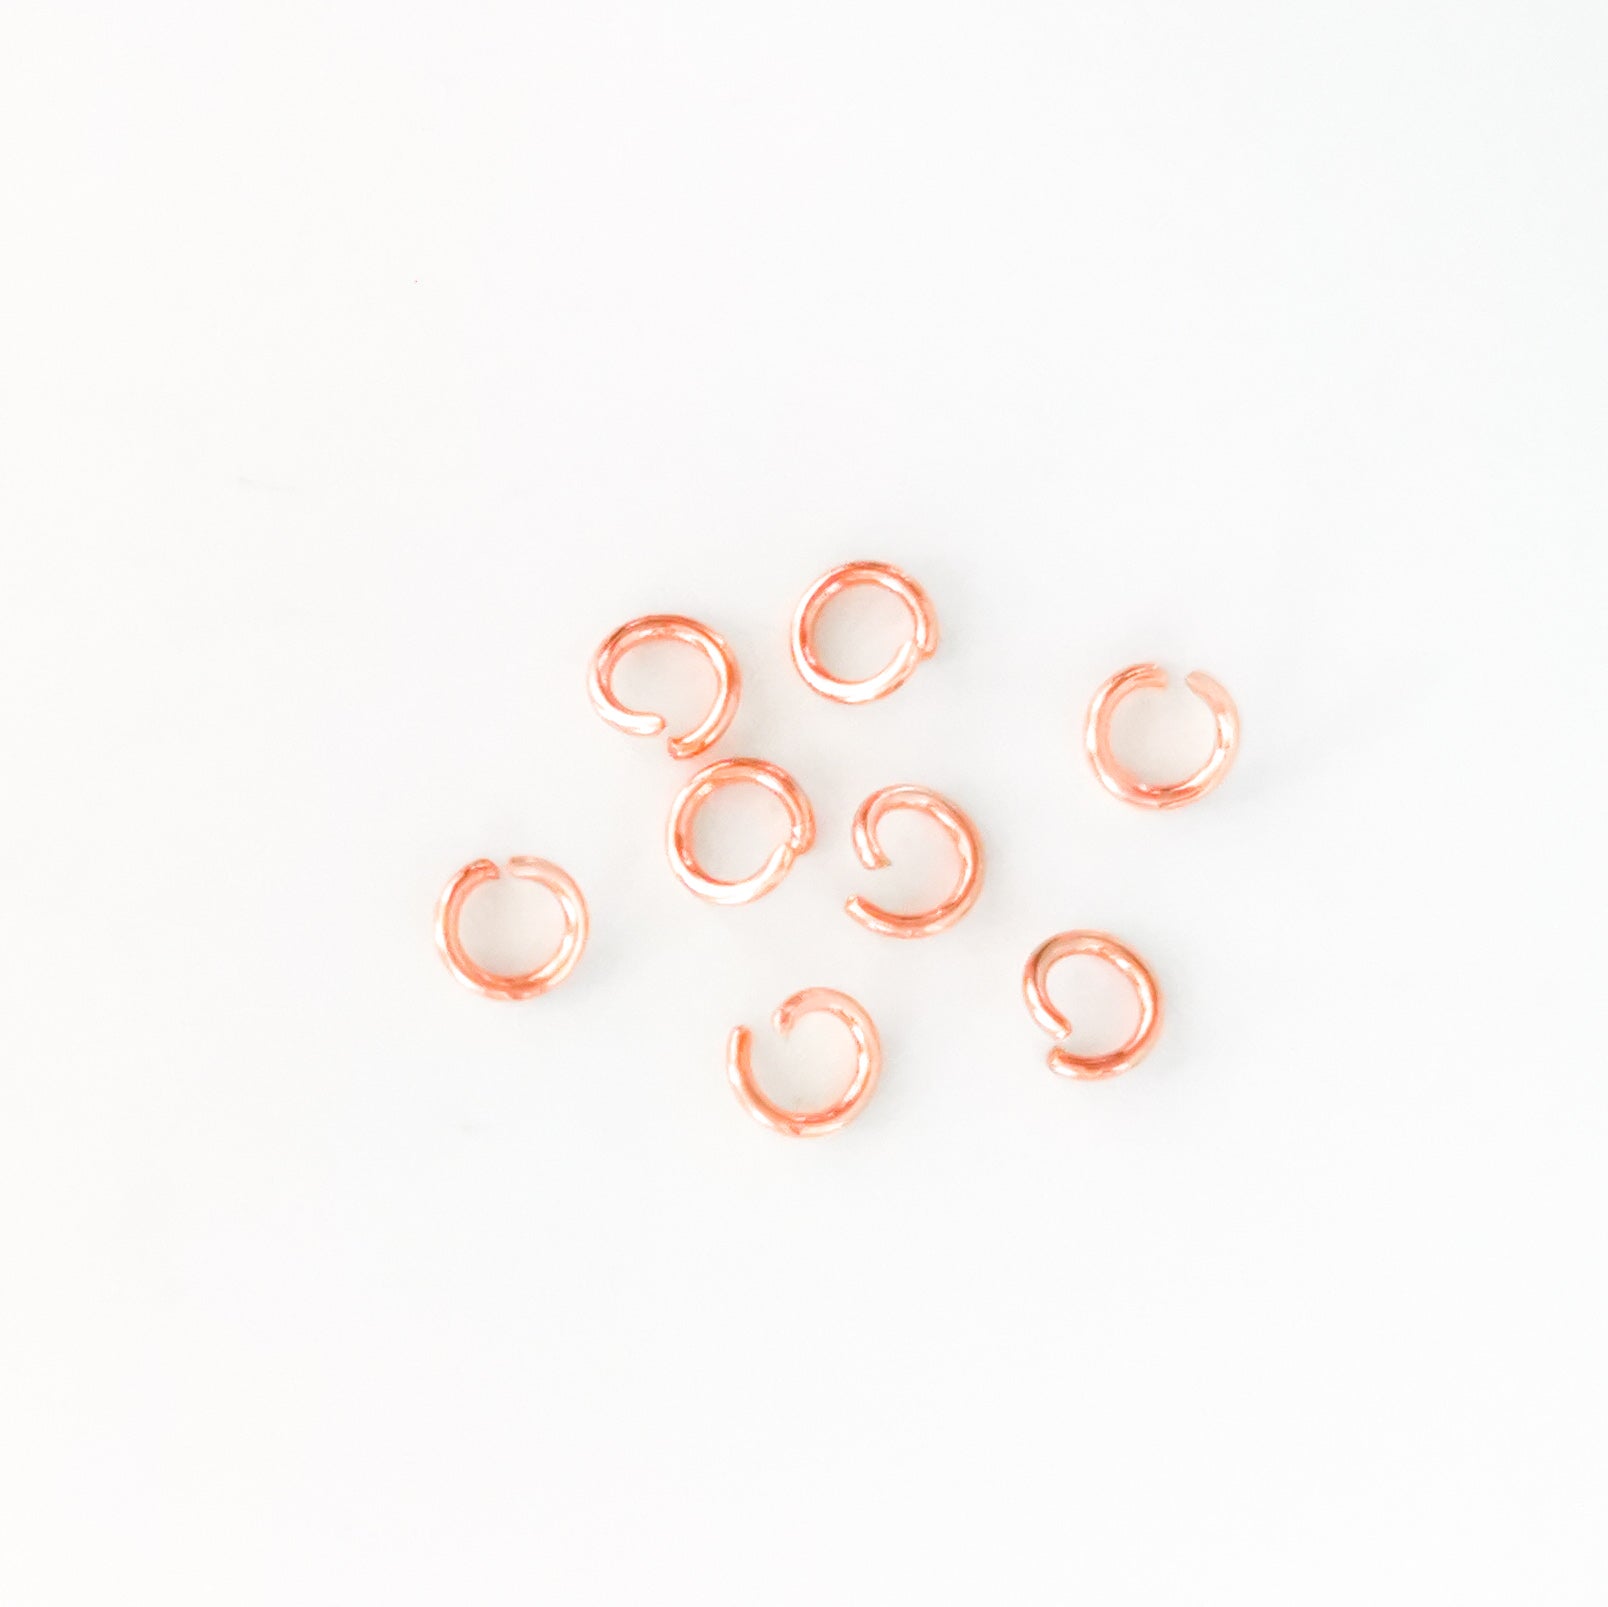 6mm Rose Gold Stainless Steel Jump Rings - 100 pieces